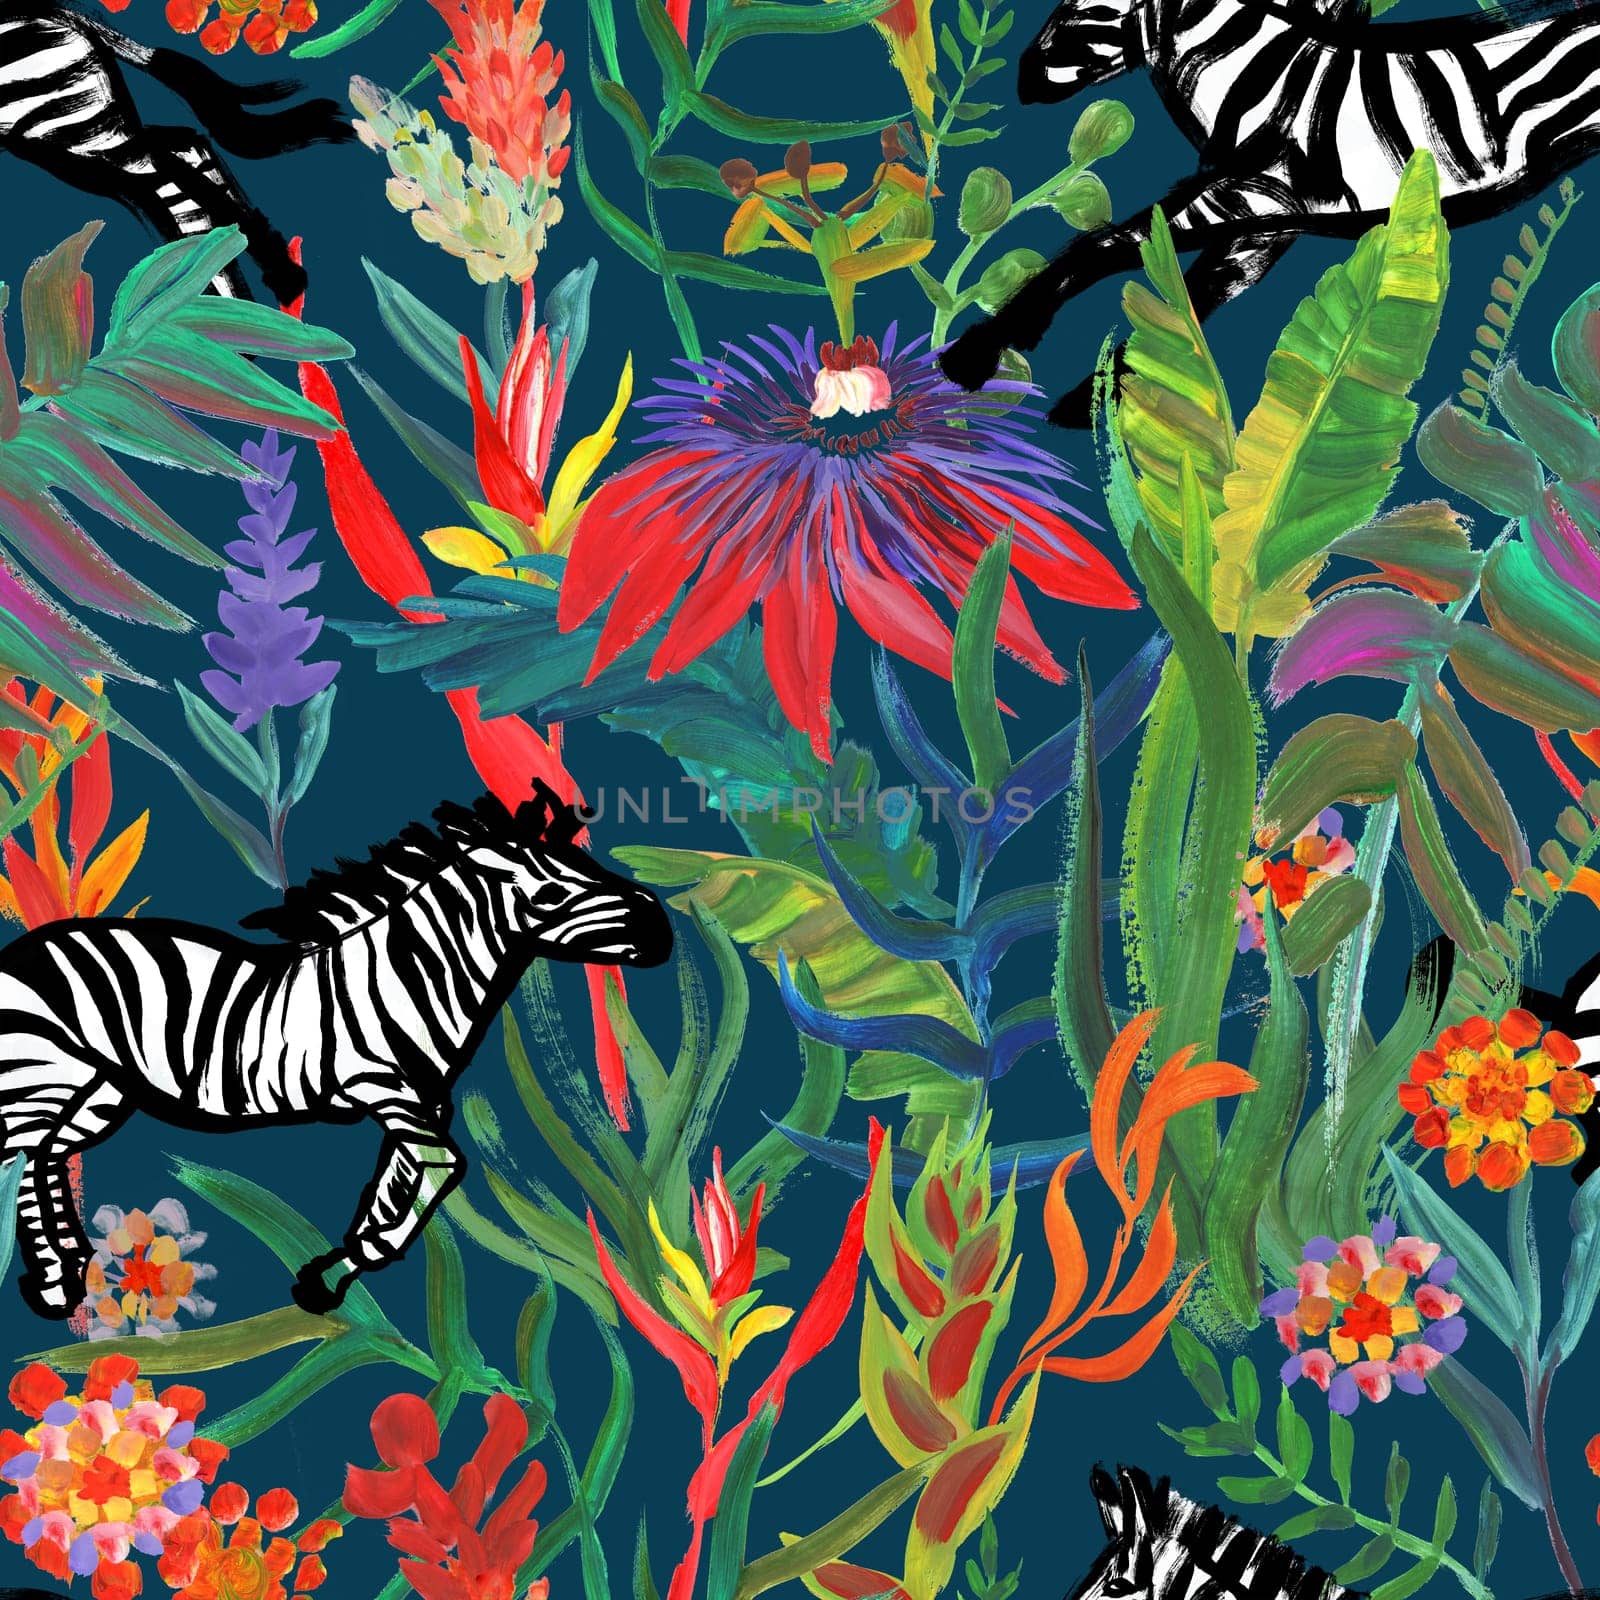 Seamless night pattern with running zebras and tropical flowers drawn in a painterly style by MarinaVoyush